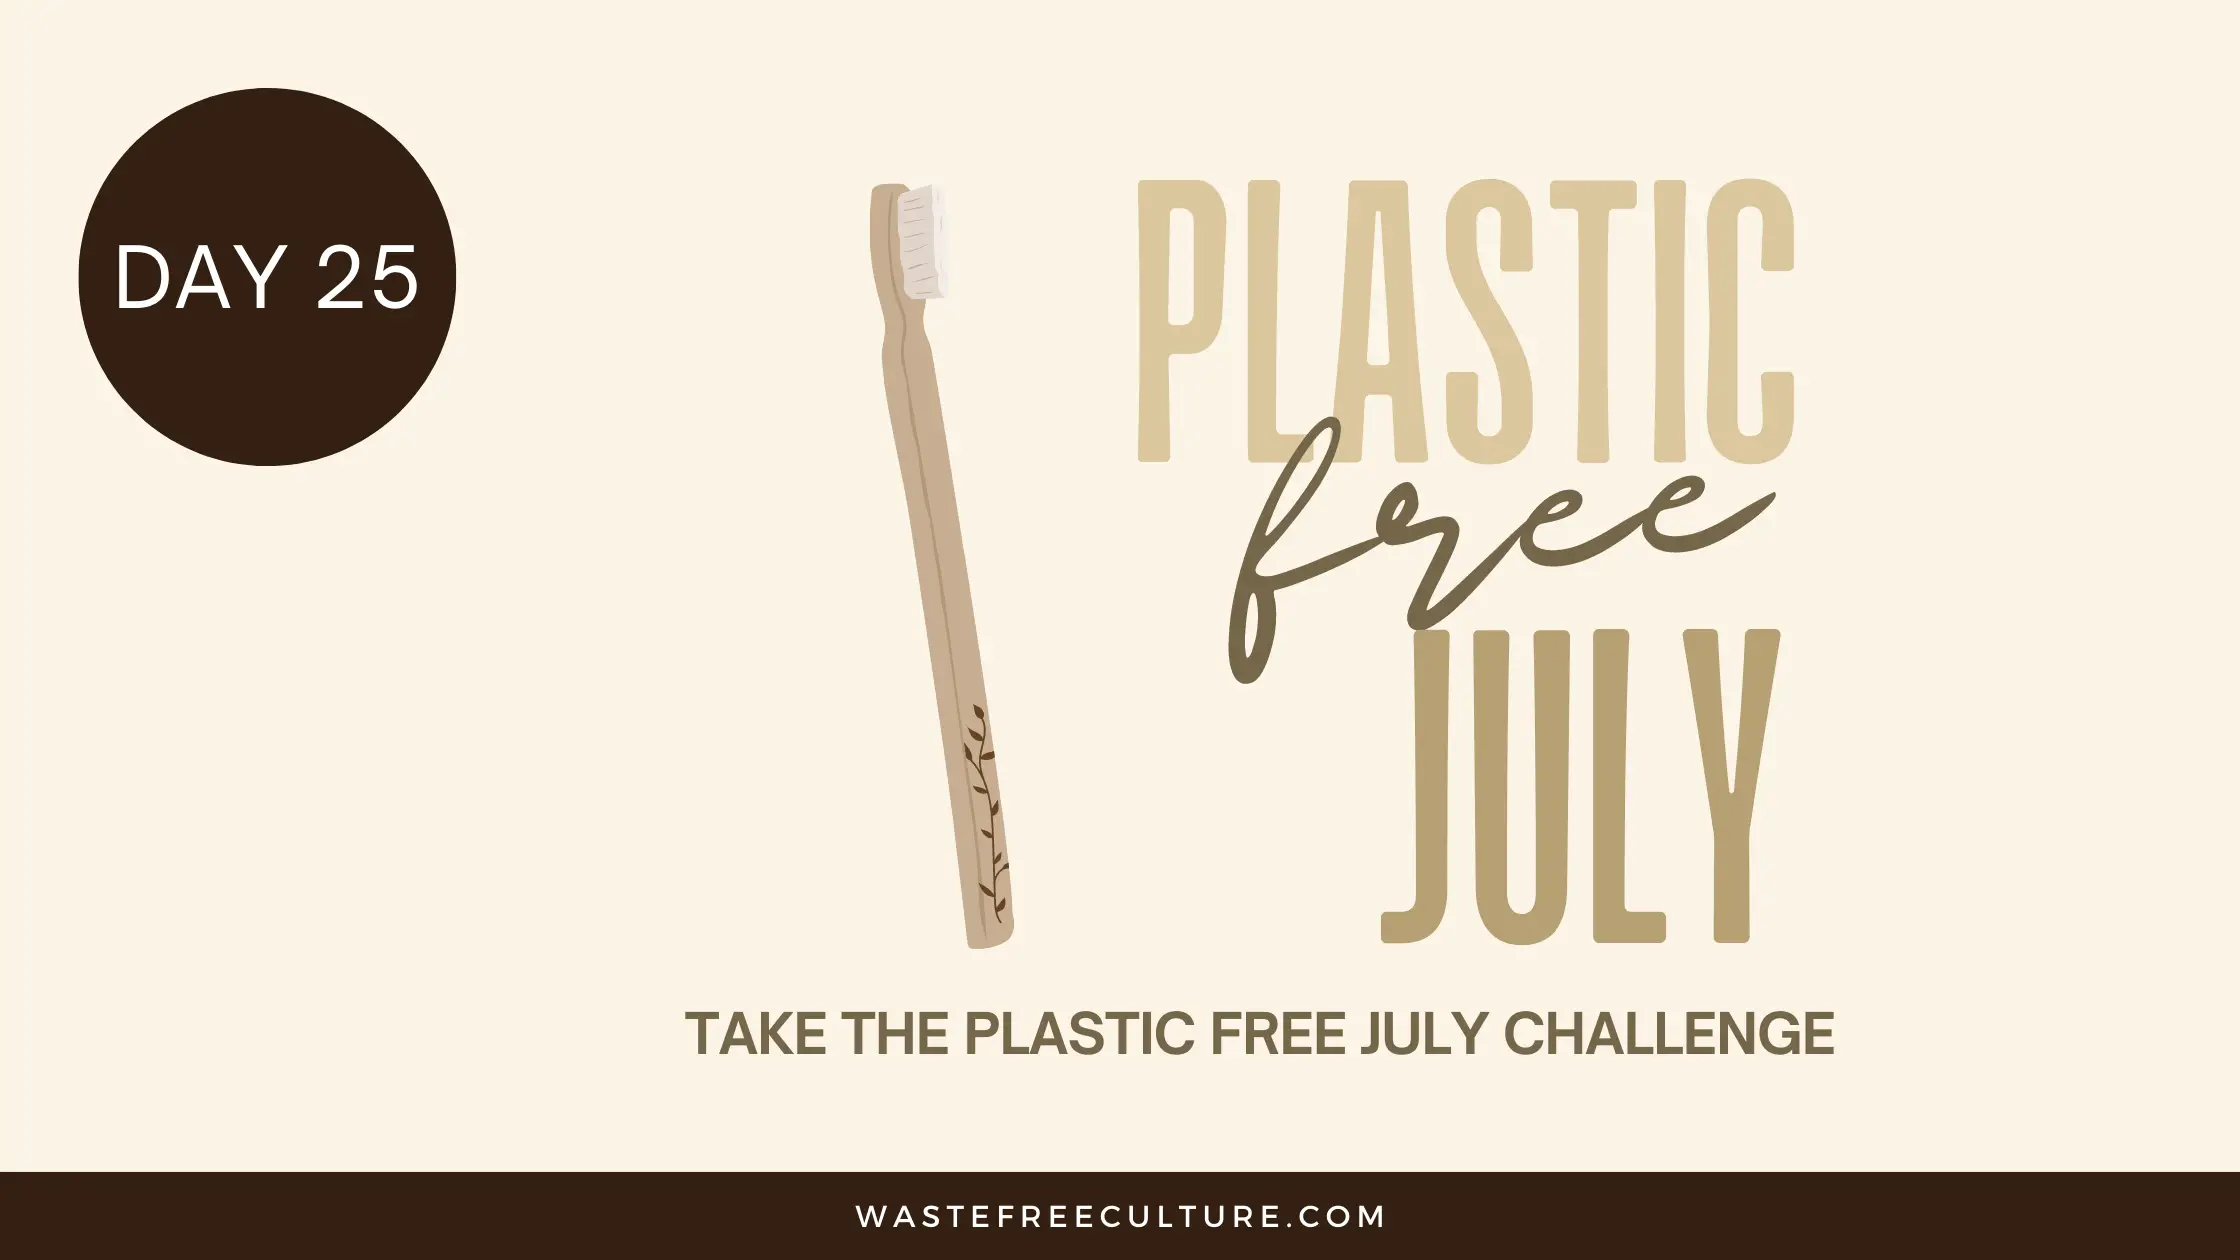 Day 25 of the Plastic Free July Challenge